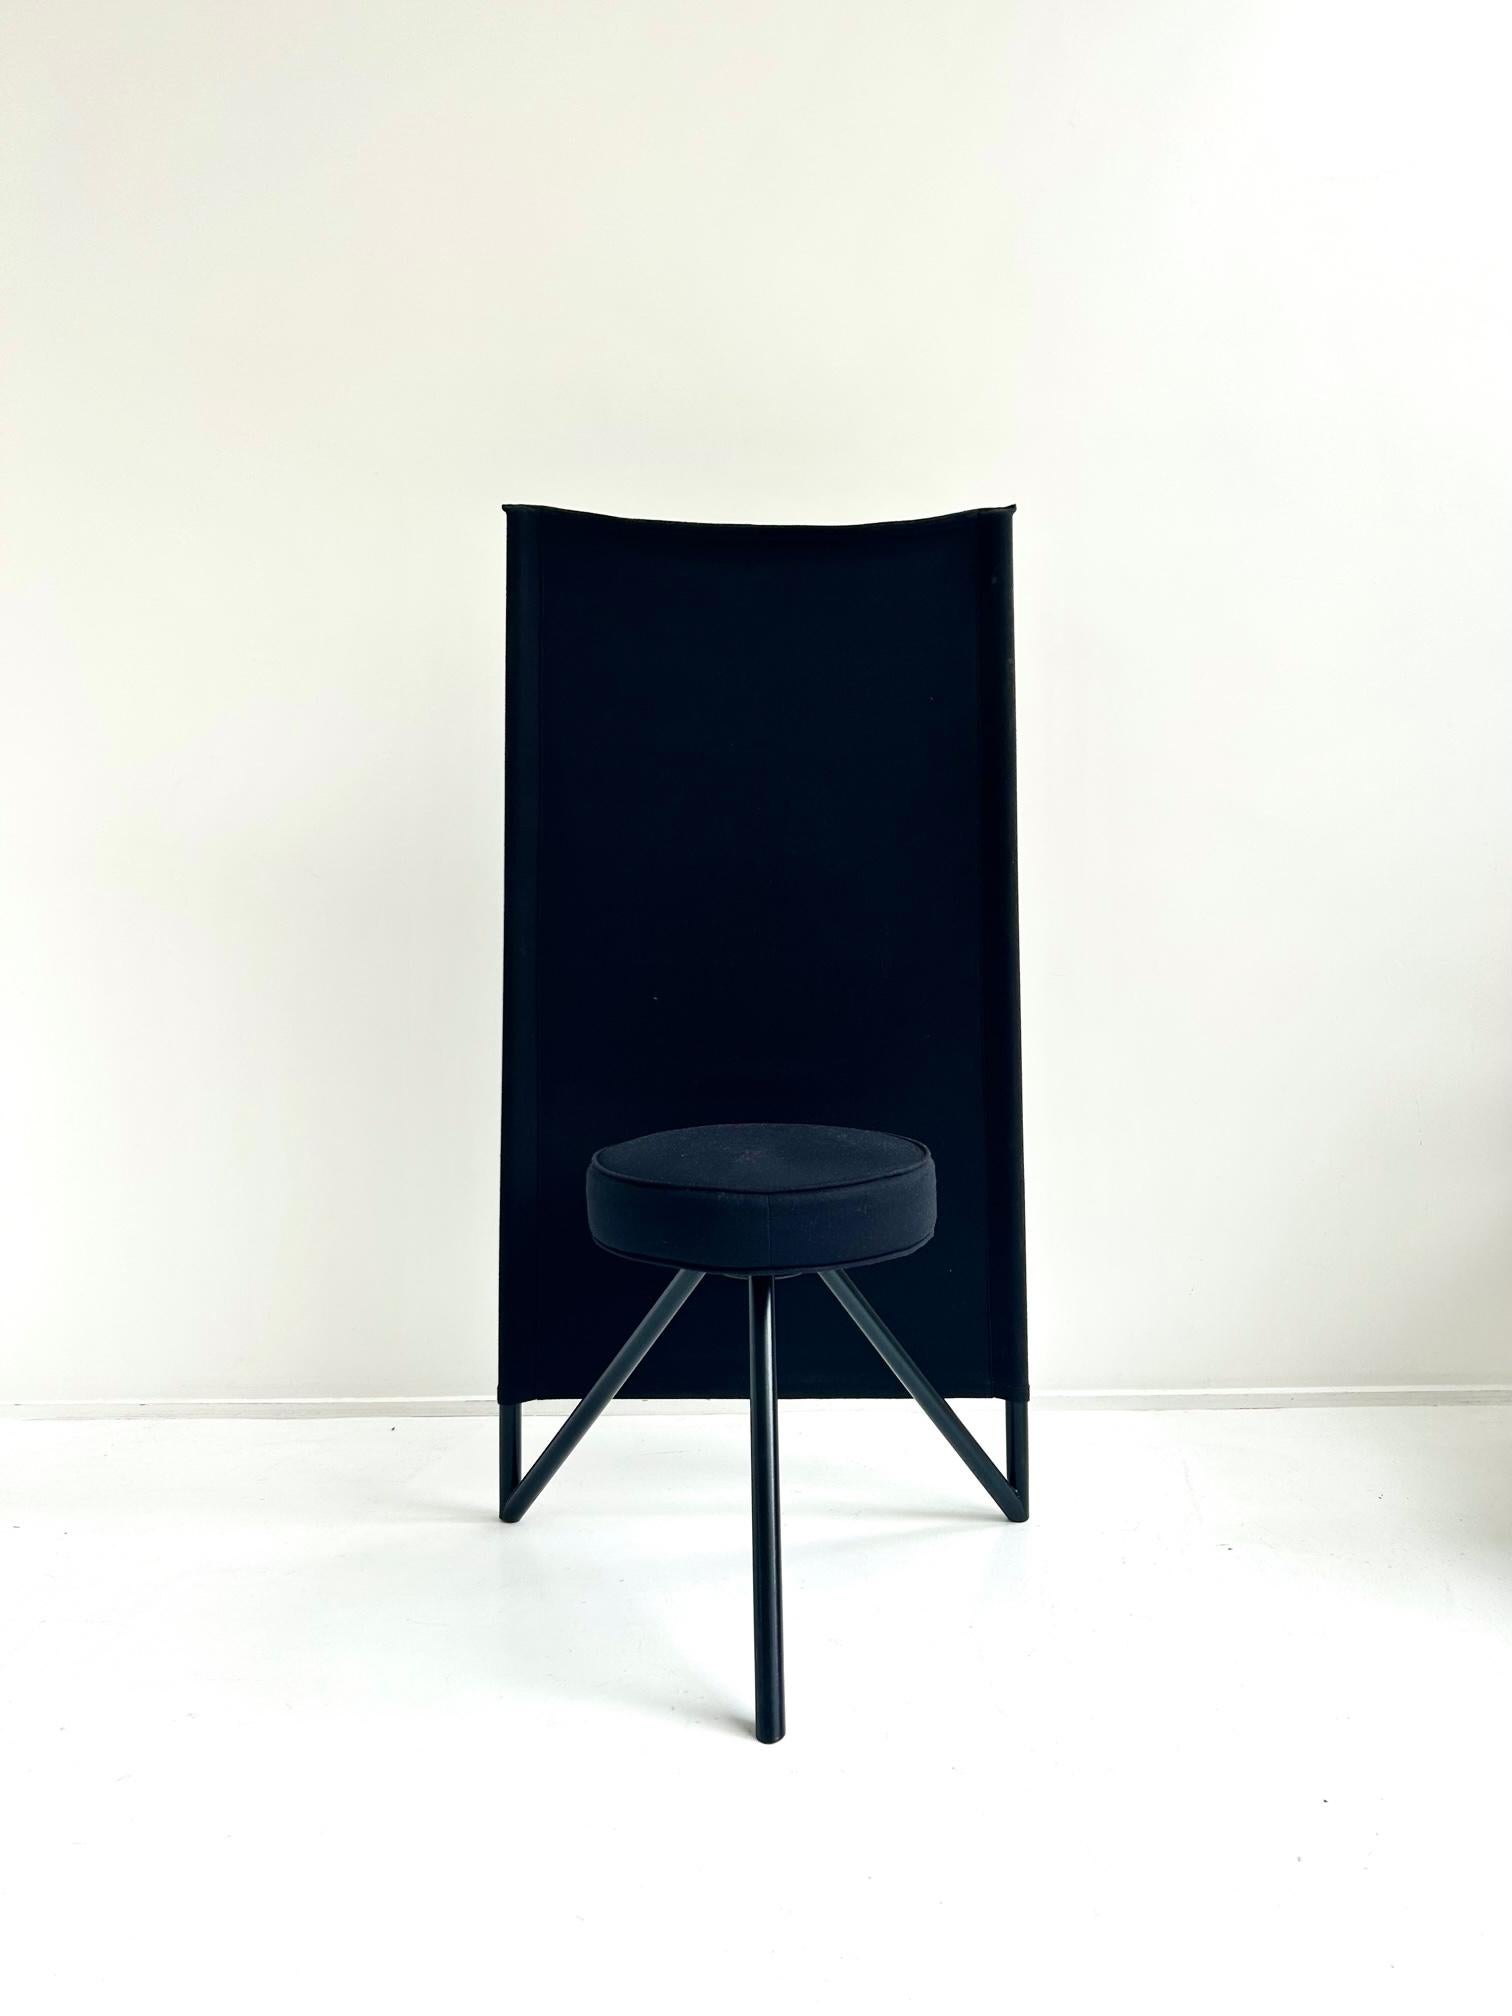 Miss Wirt chair by Philippe Starck for Disform, 1983

Metal tube, cotton canvas
Black fabric in very good condition, metal structure in very good condition

H. 114 cm - L. 58 cm - D. 40 cm